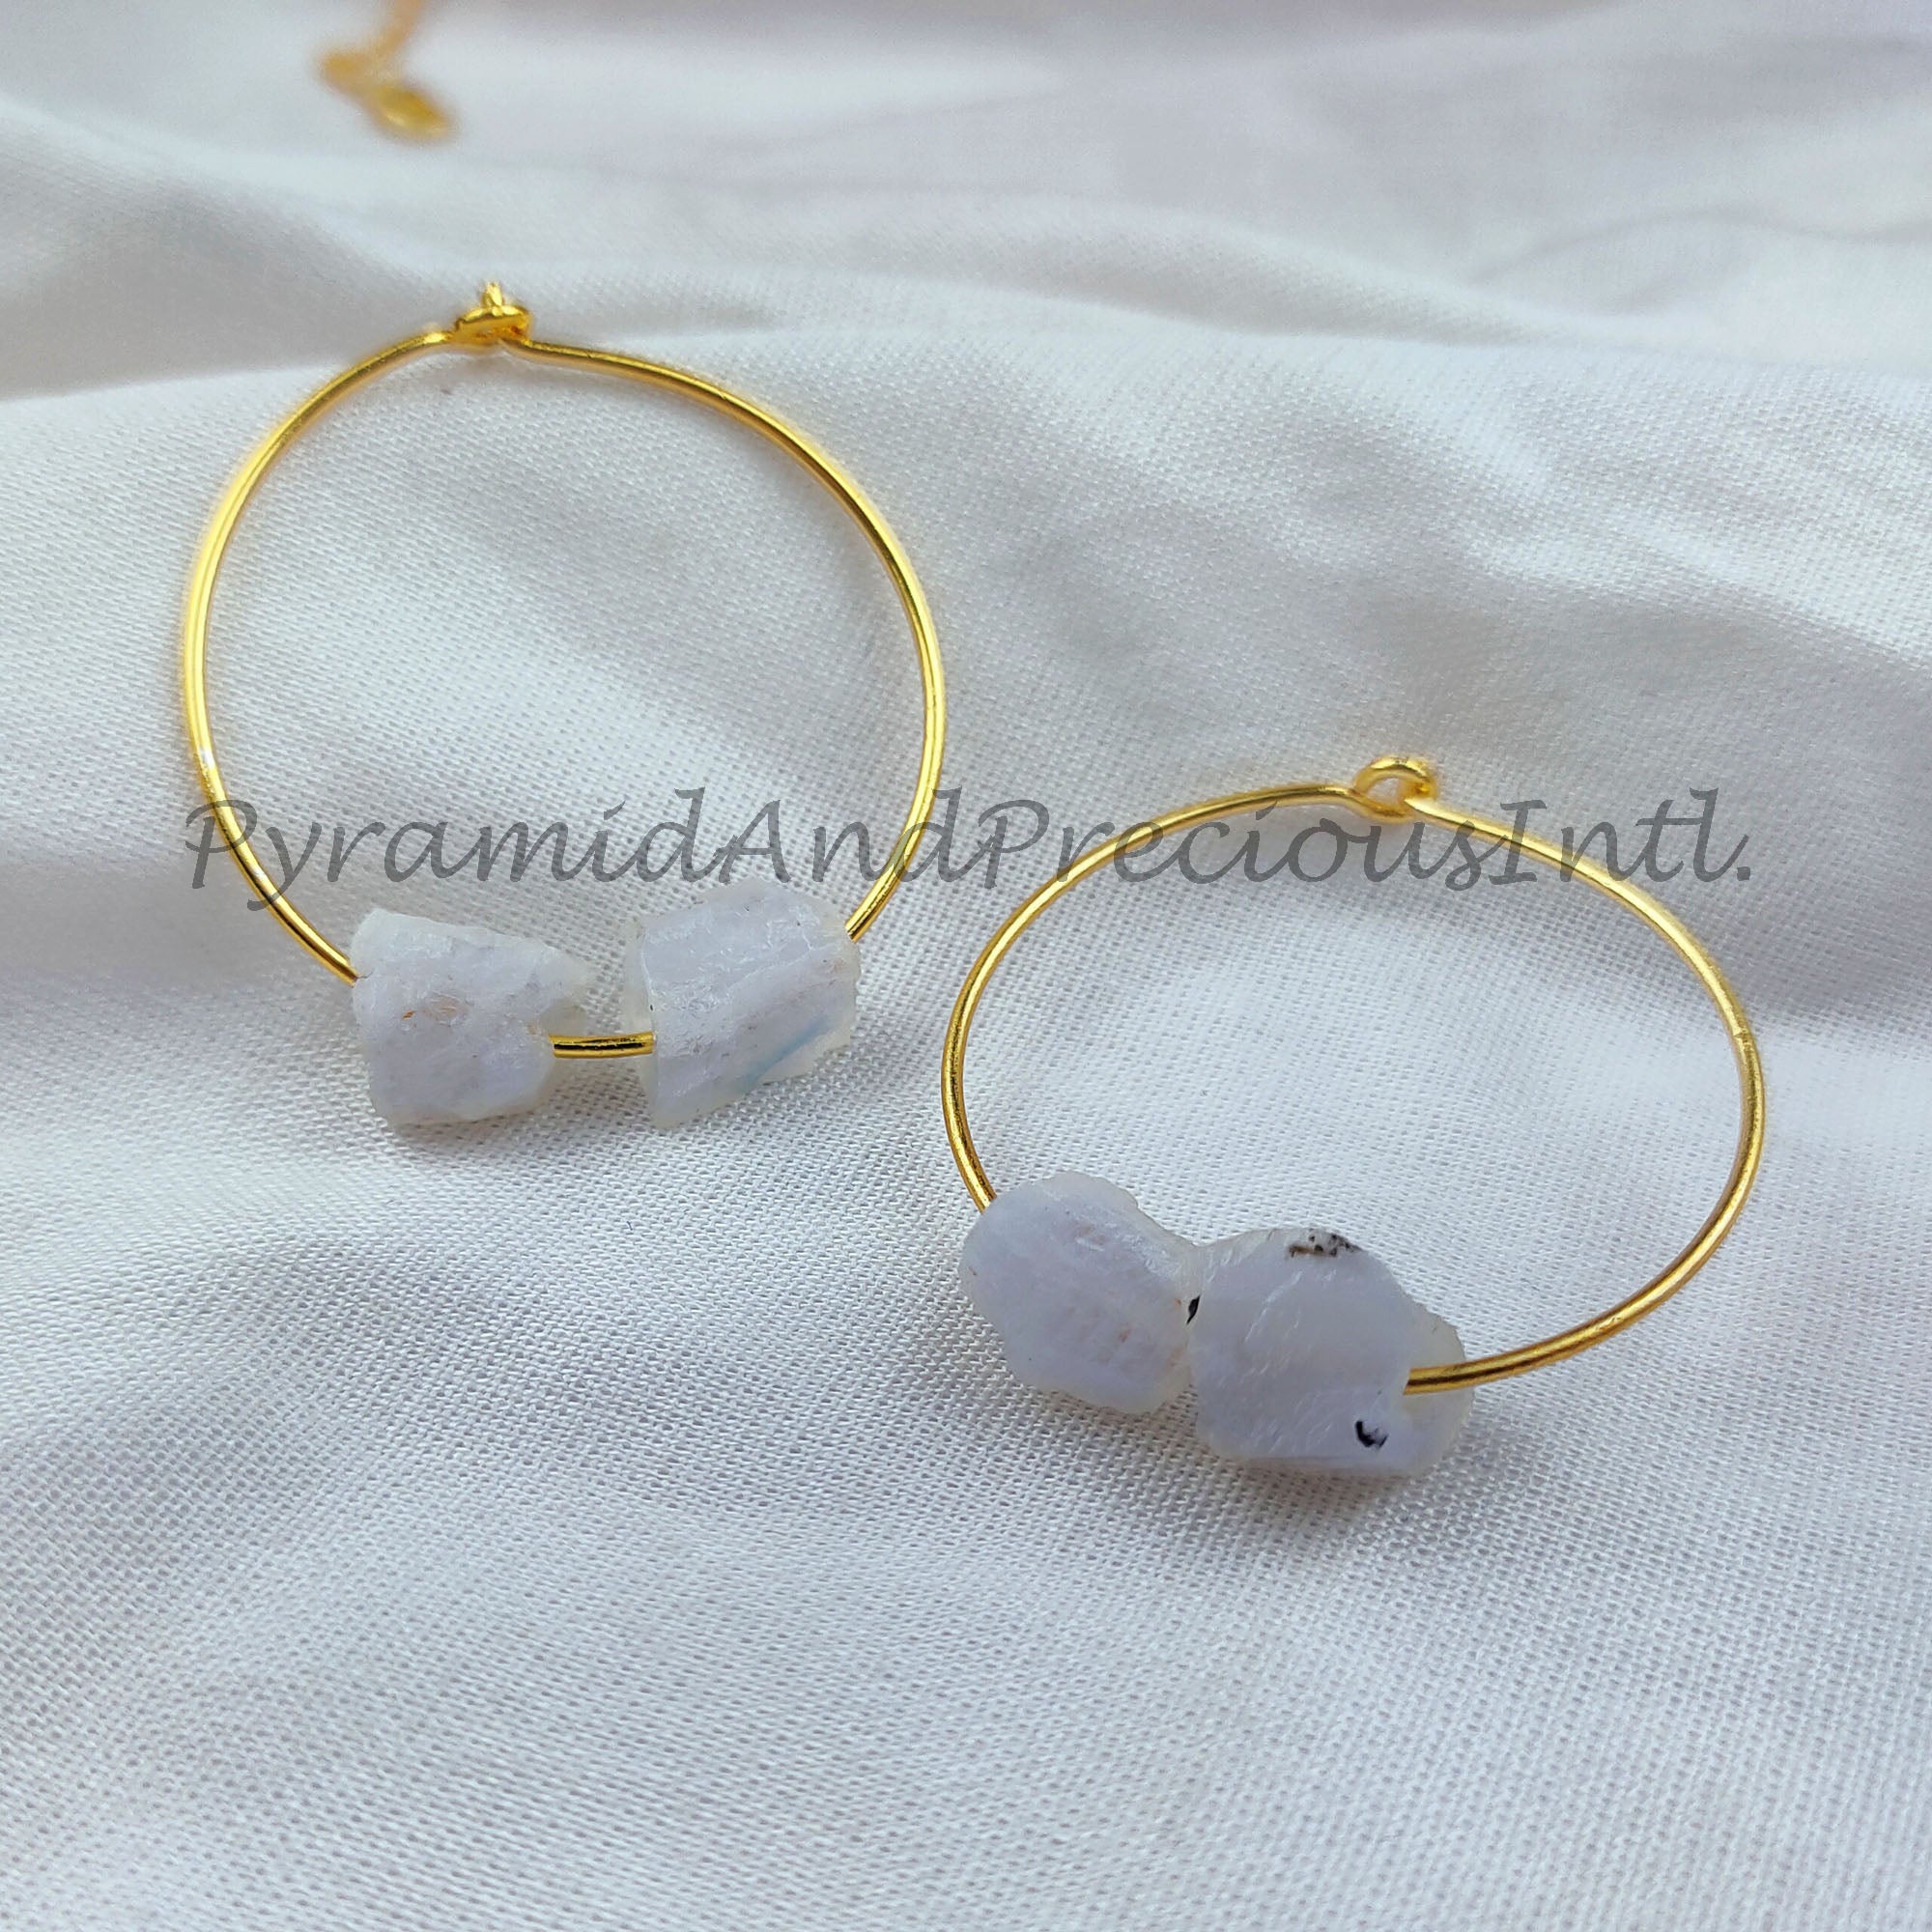 Natural Rainbow Moonstone Earrings, Rough Moonstone Jewelry, 14K Gold Plated Earrings, Sold By Pair